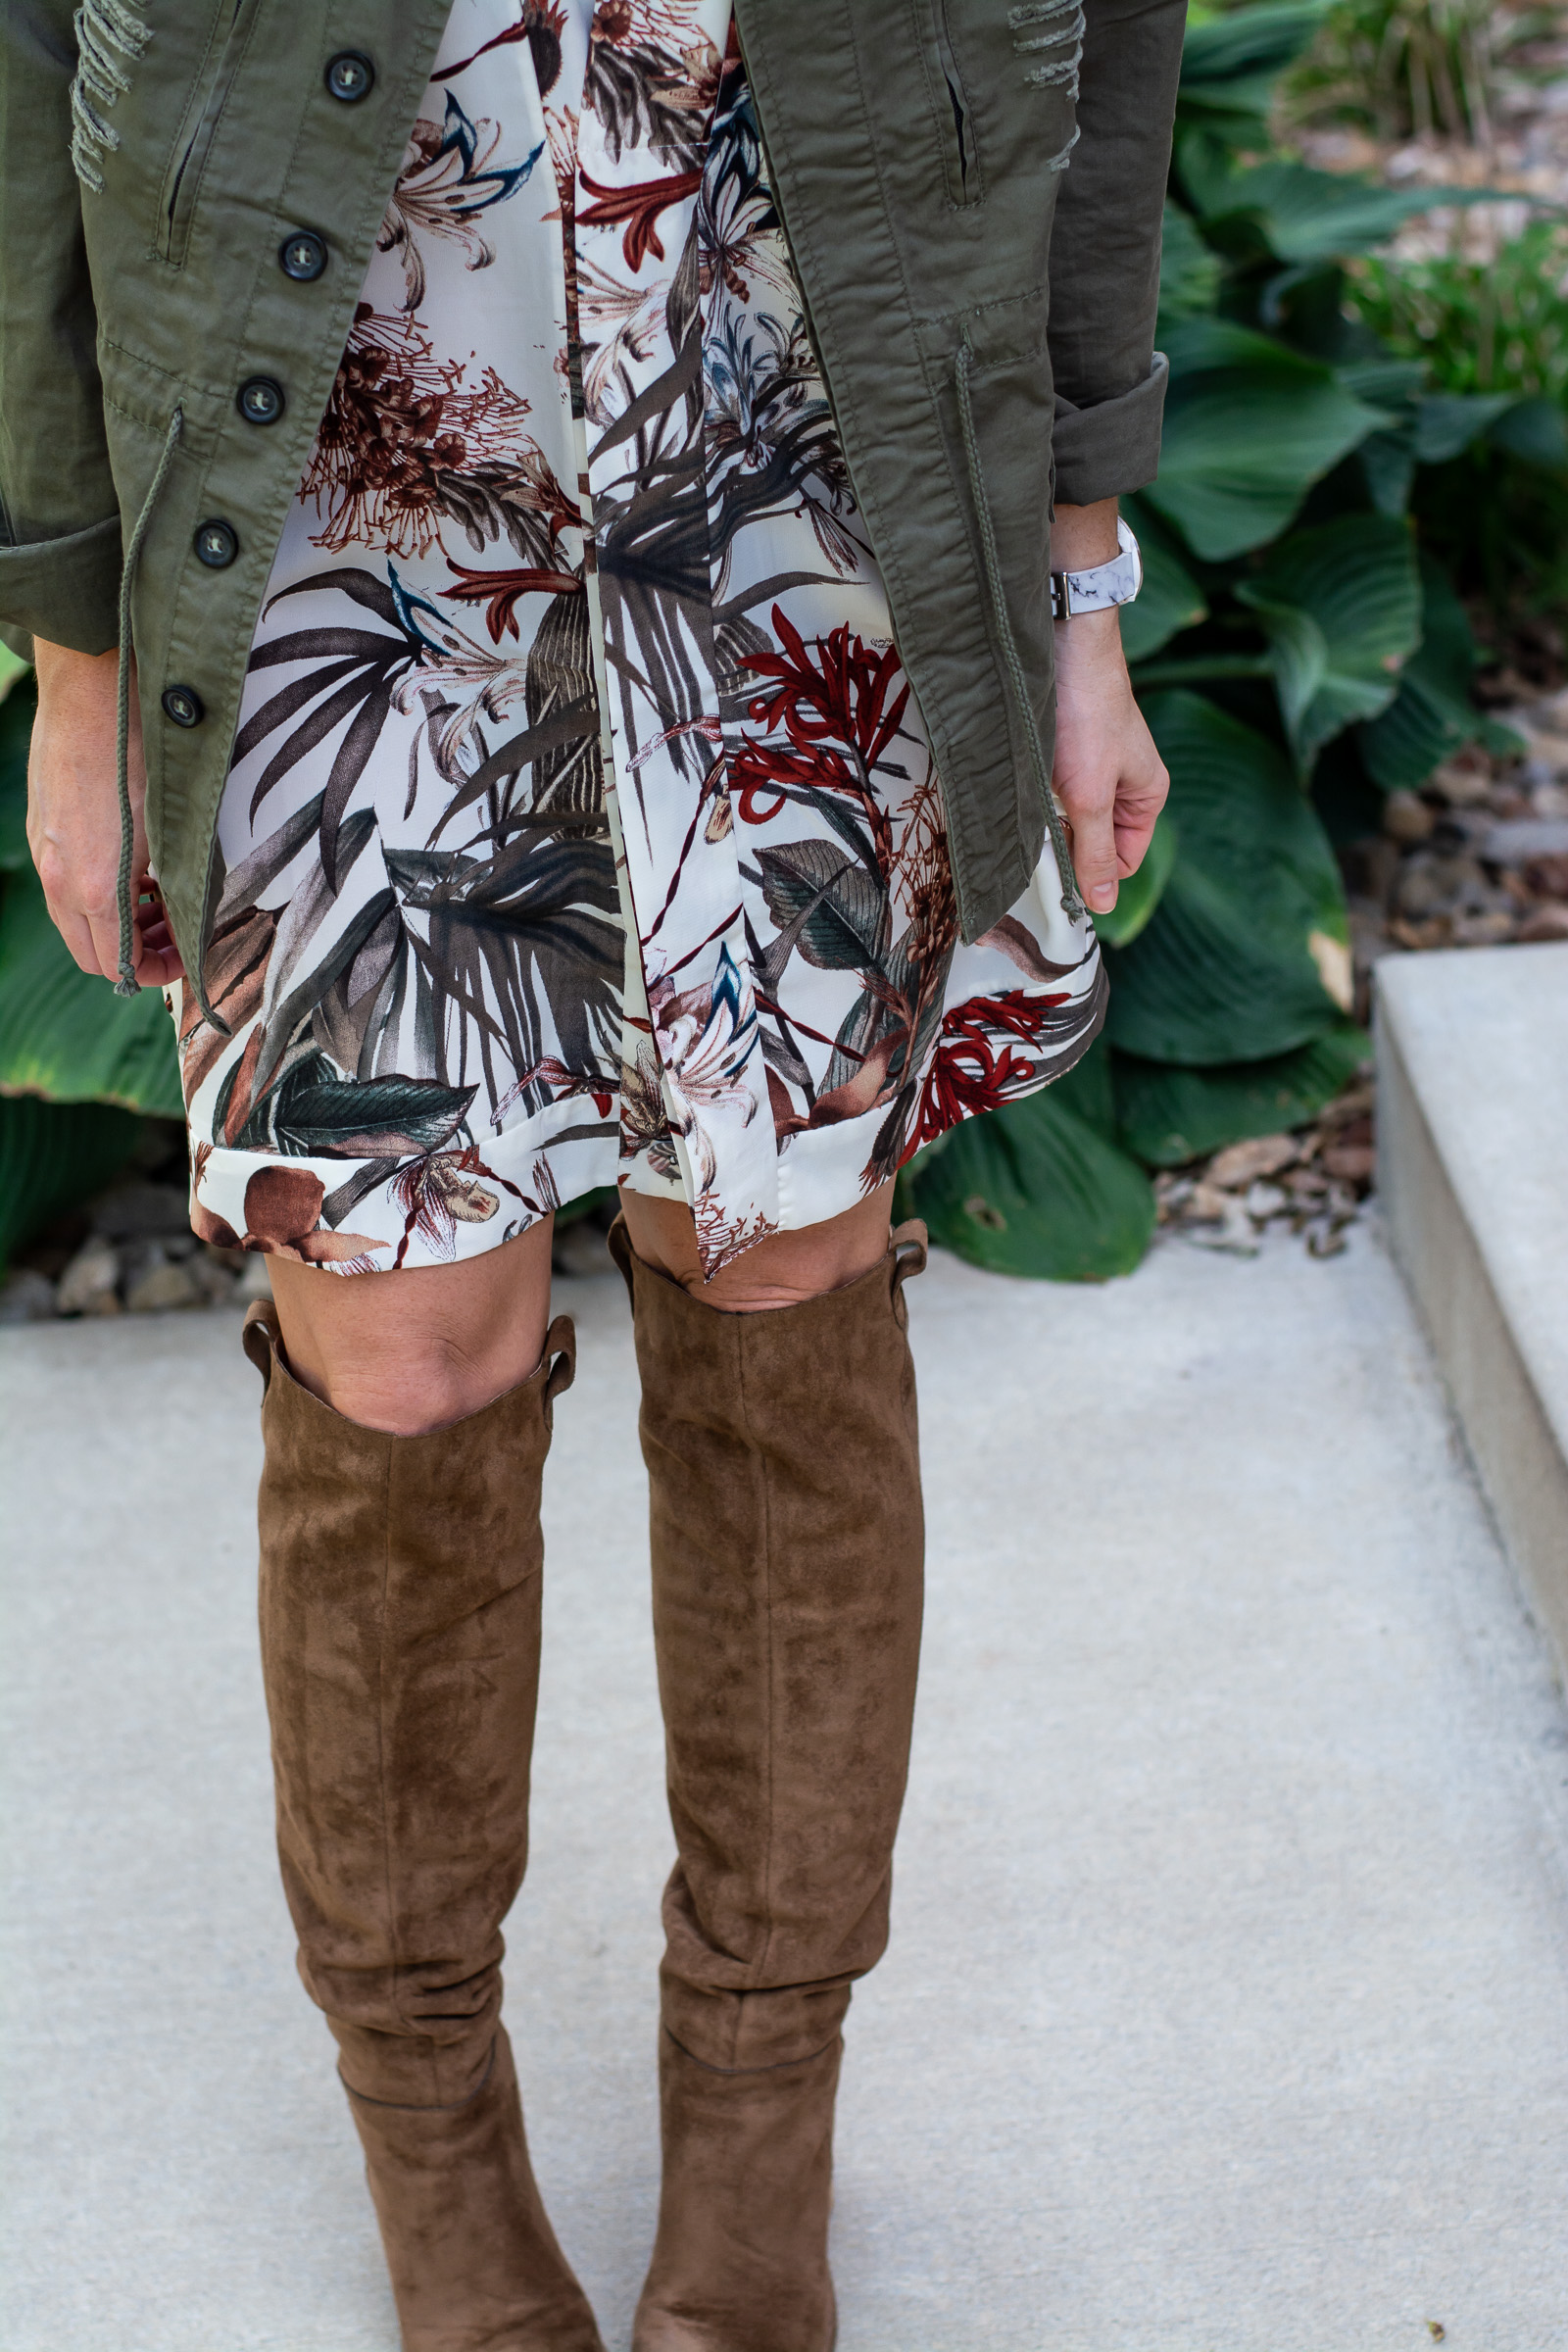 Transitional Tropical Dress + Tall Boots. | Ashley from LSR